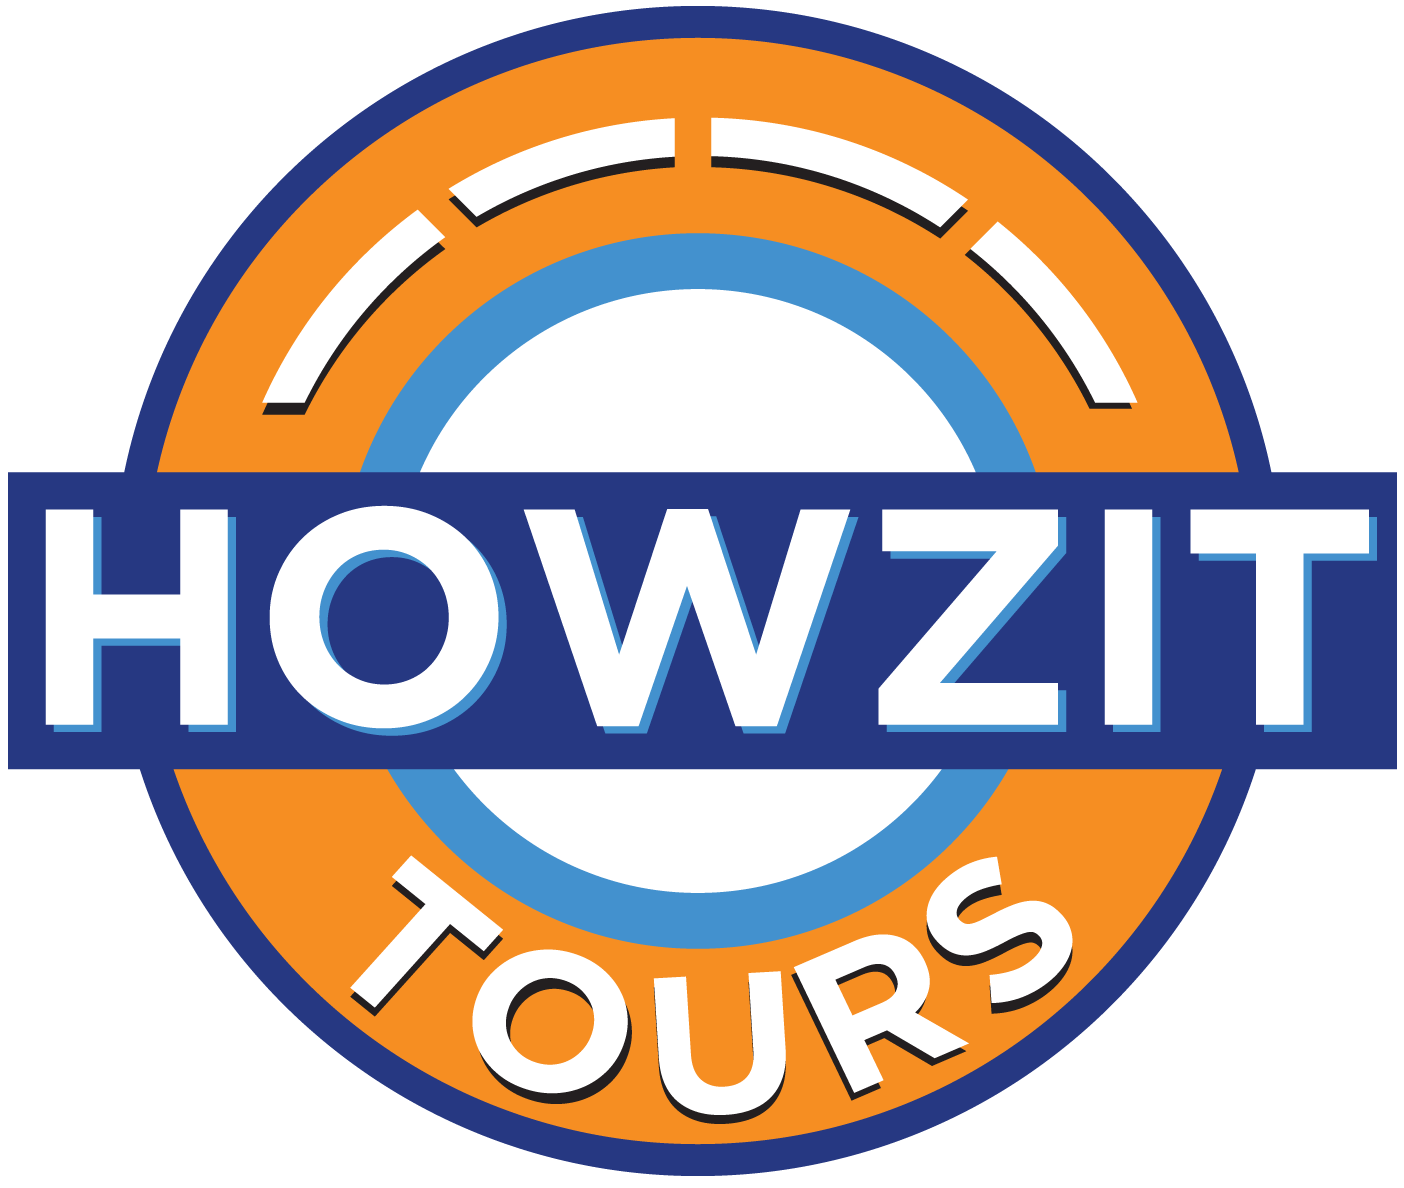 Howzit Tours - private tours and shuttle services around Cape Town